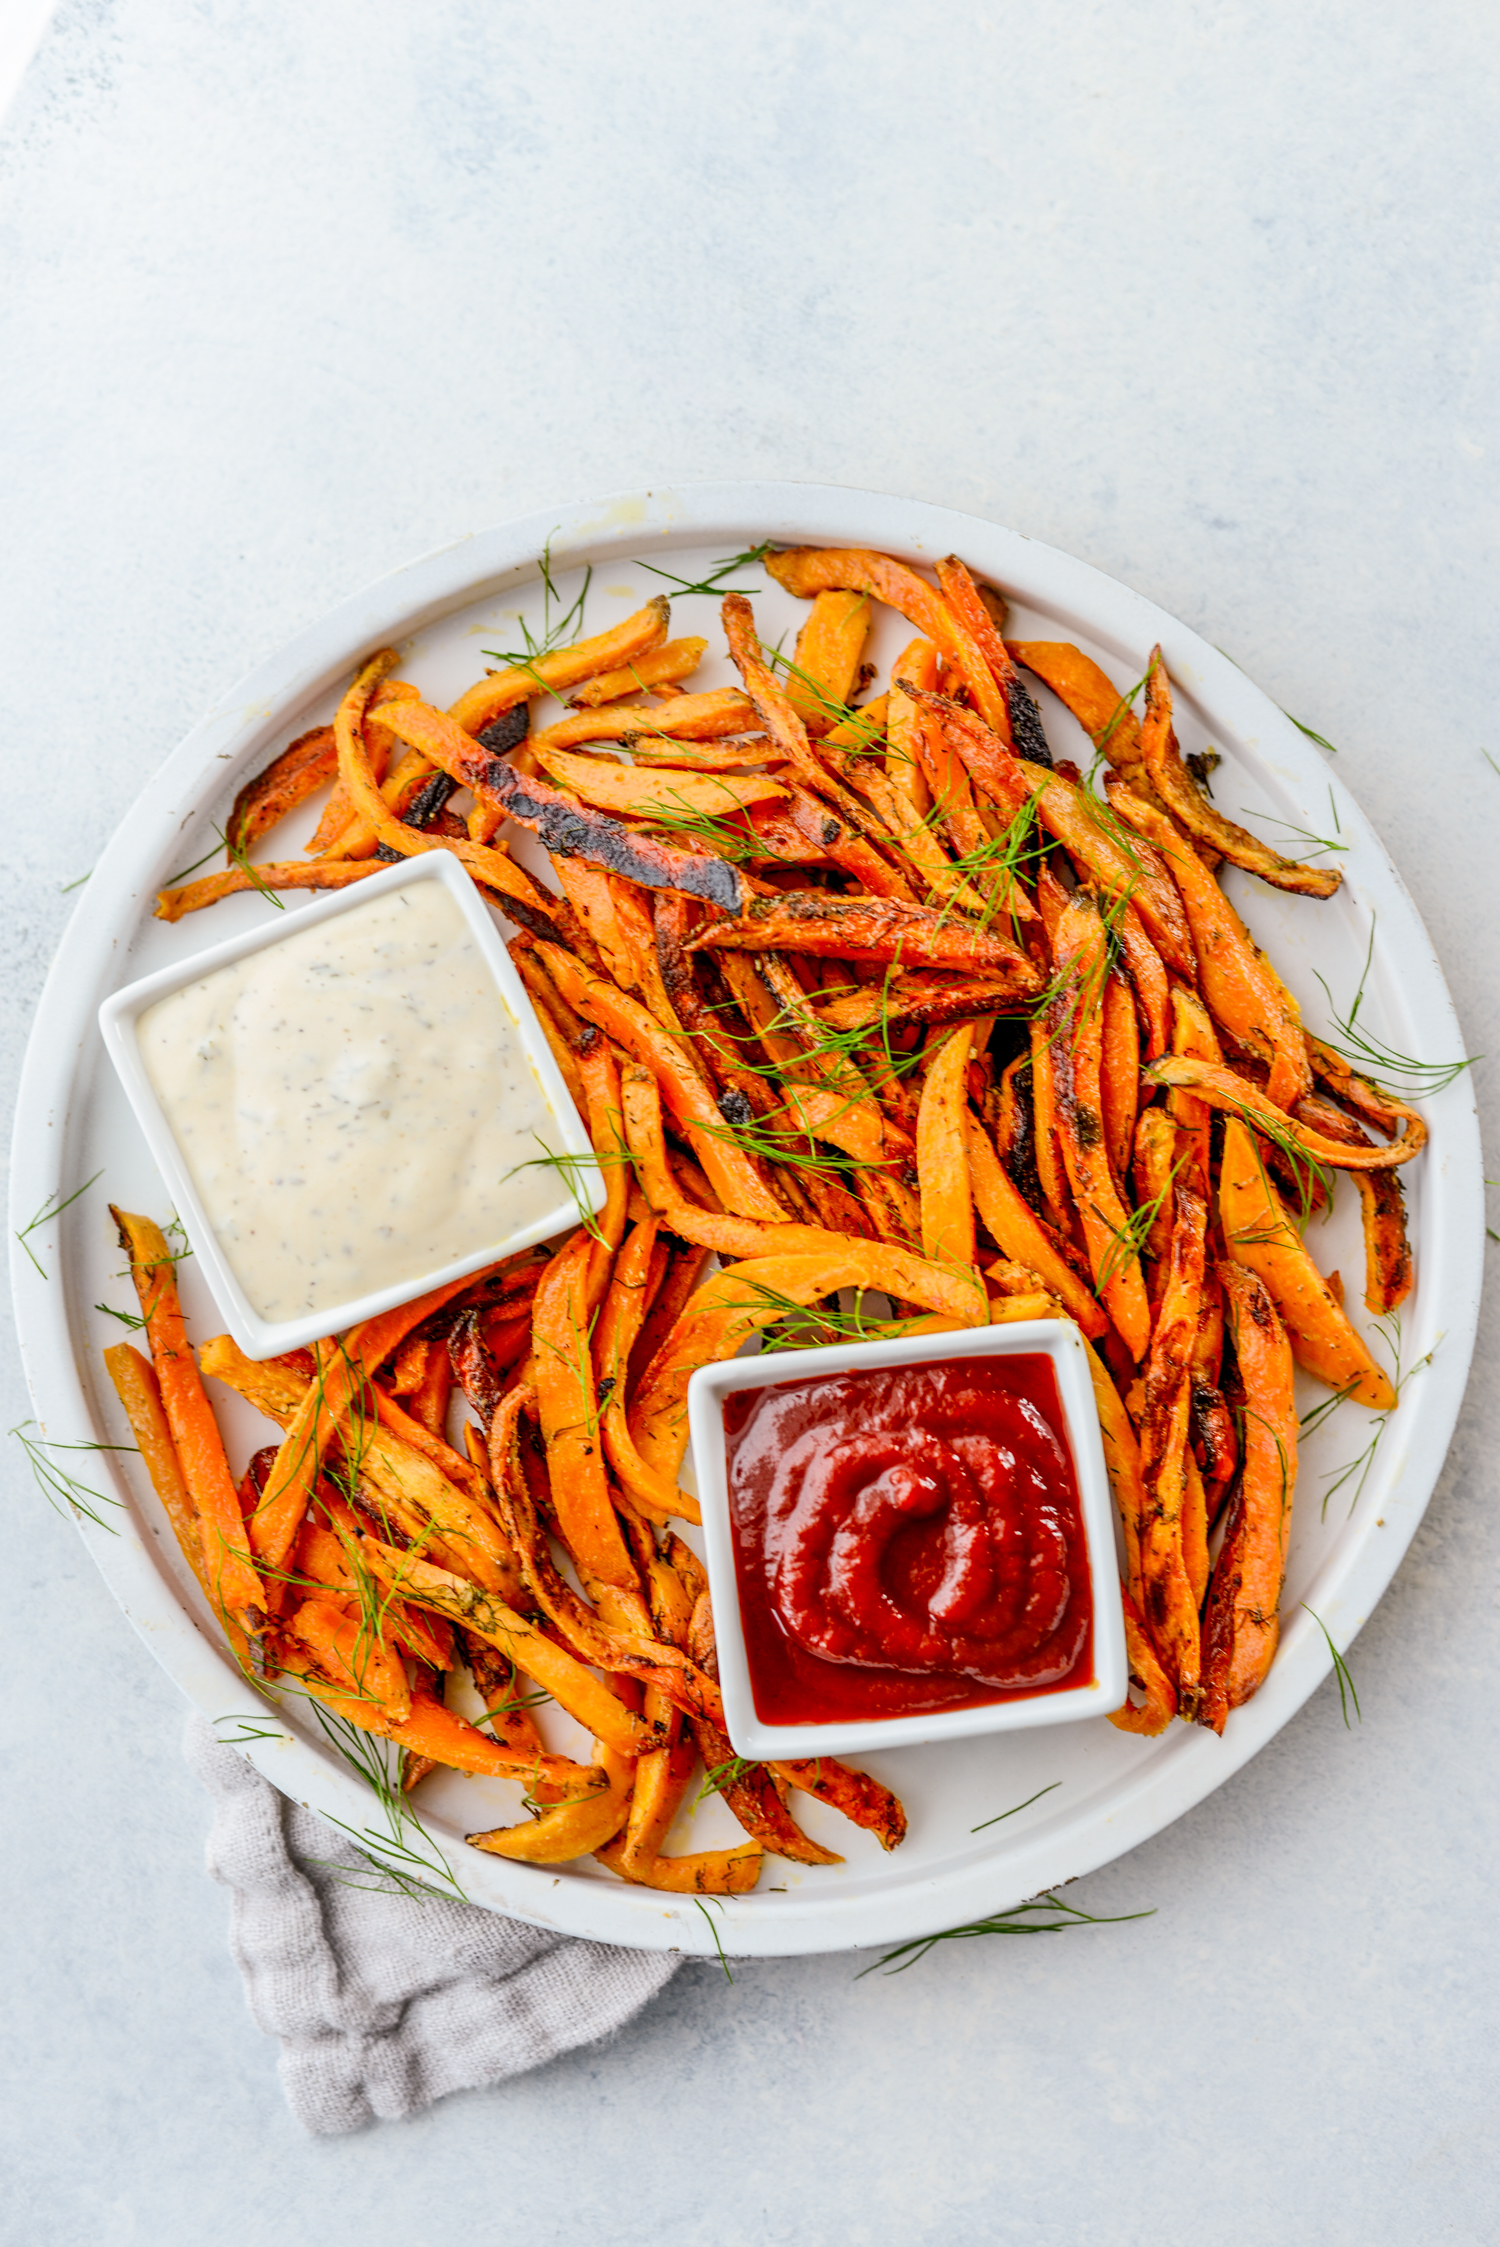 Crispy Homemade Dairy-Free Ranch Fries | simplerootswellness.com #frenchfries #easyrecipes #mealprep #ranch #healthy